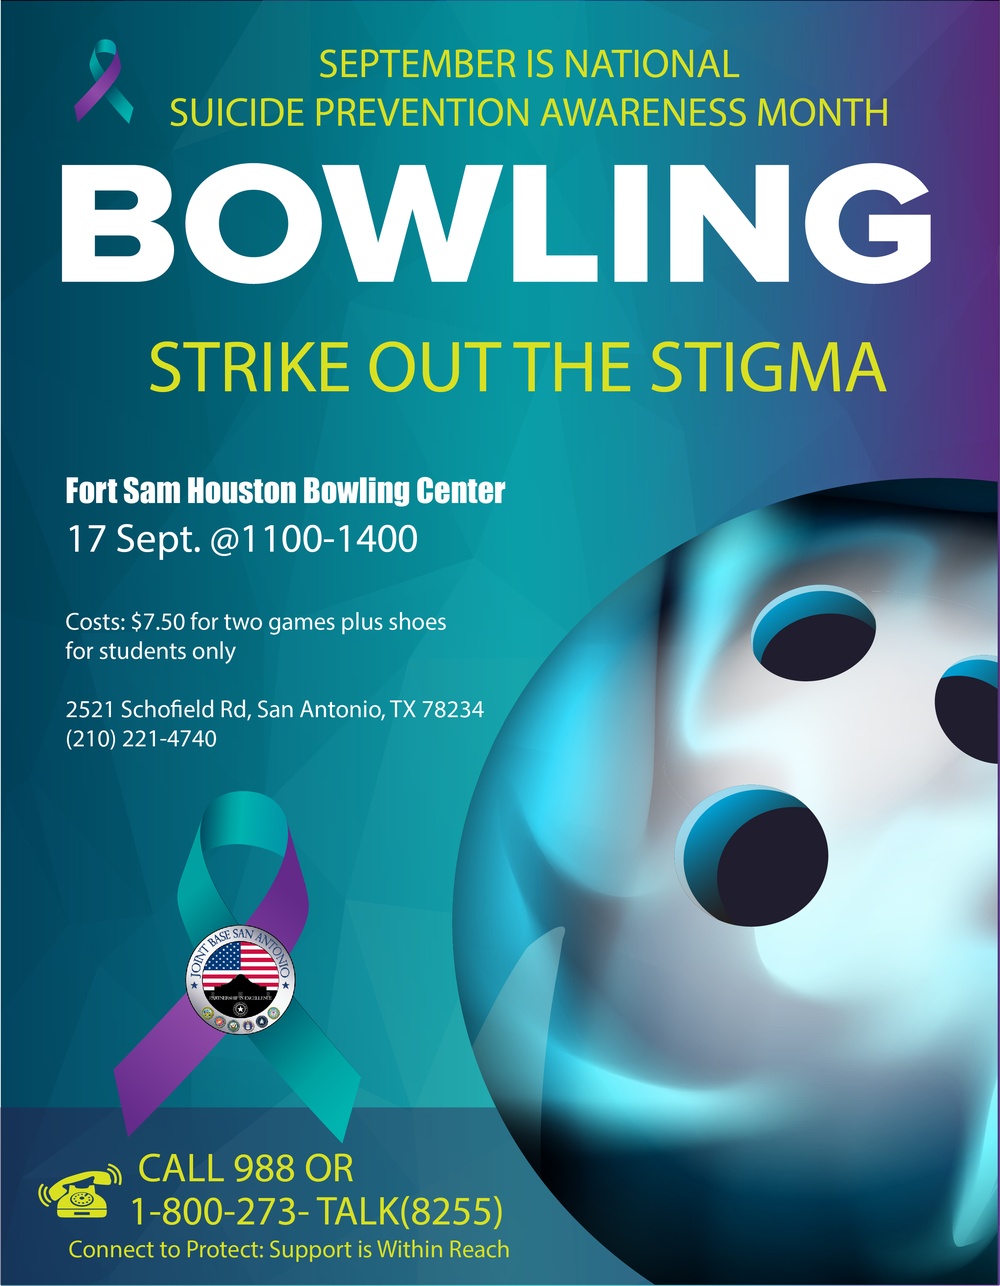 JBSA Suicide Prevention Awareness Month Bowling game